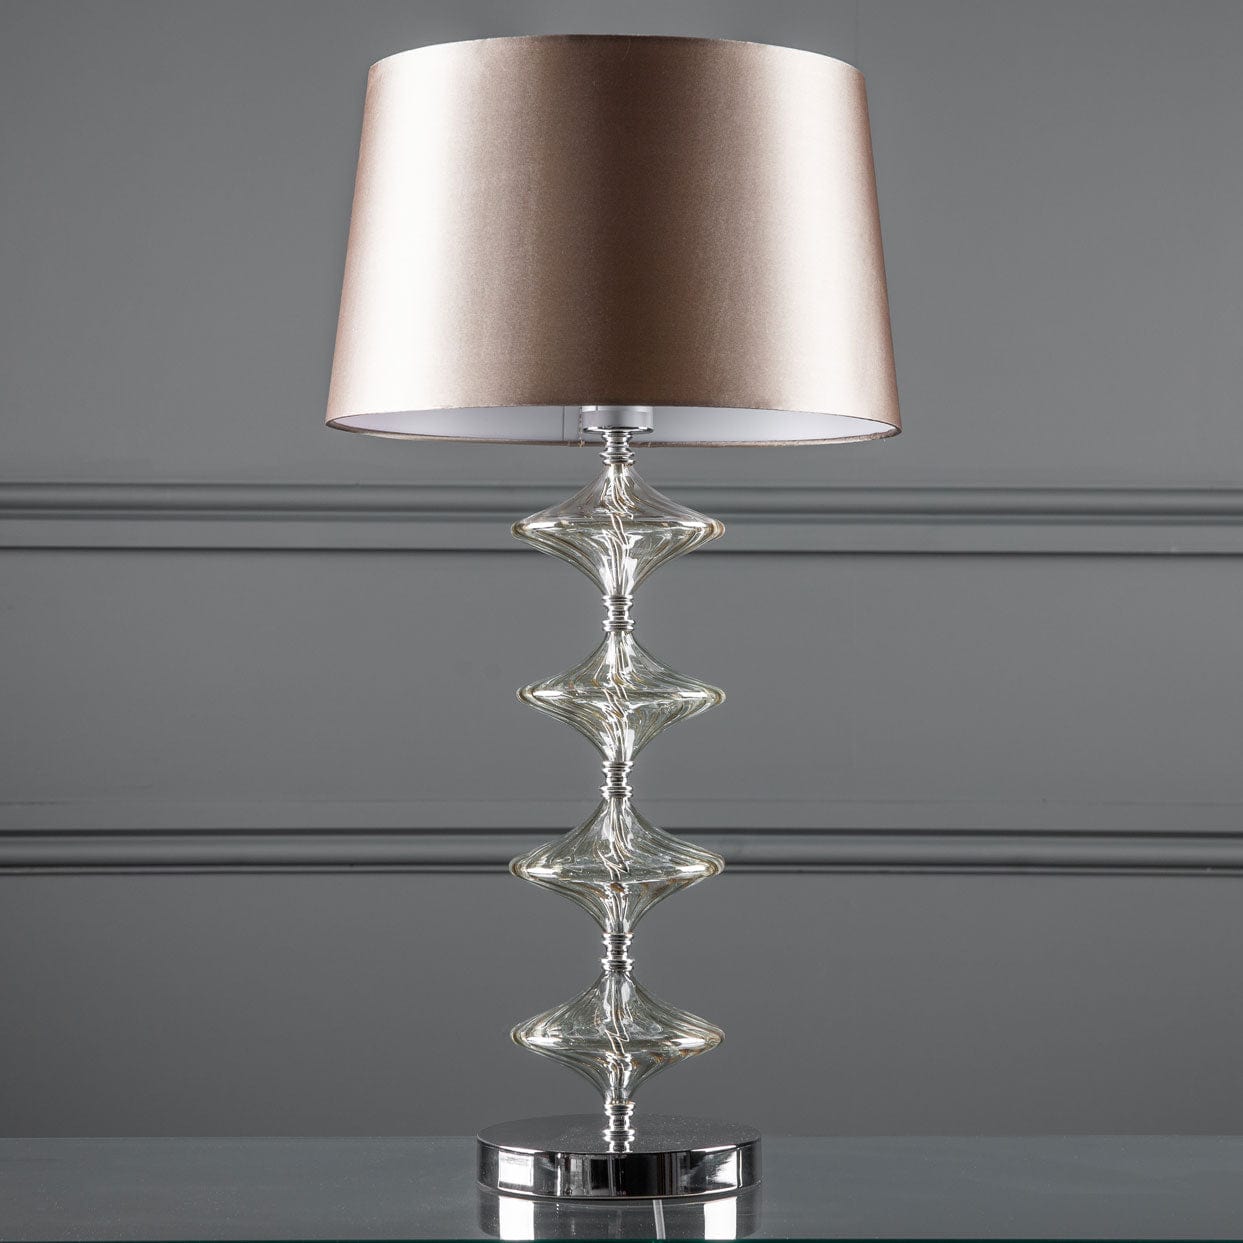 Lights  -  Pacific Lifestyle Gabby Metal And Lustre Glass Table Lamp  -  50113829